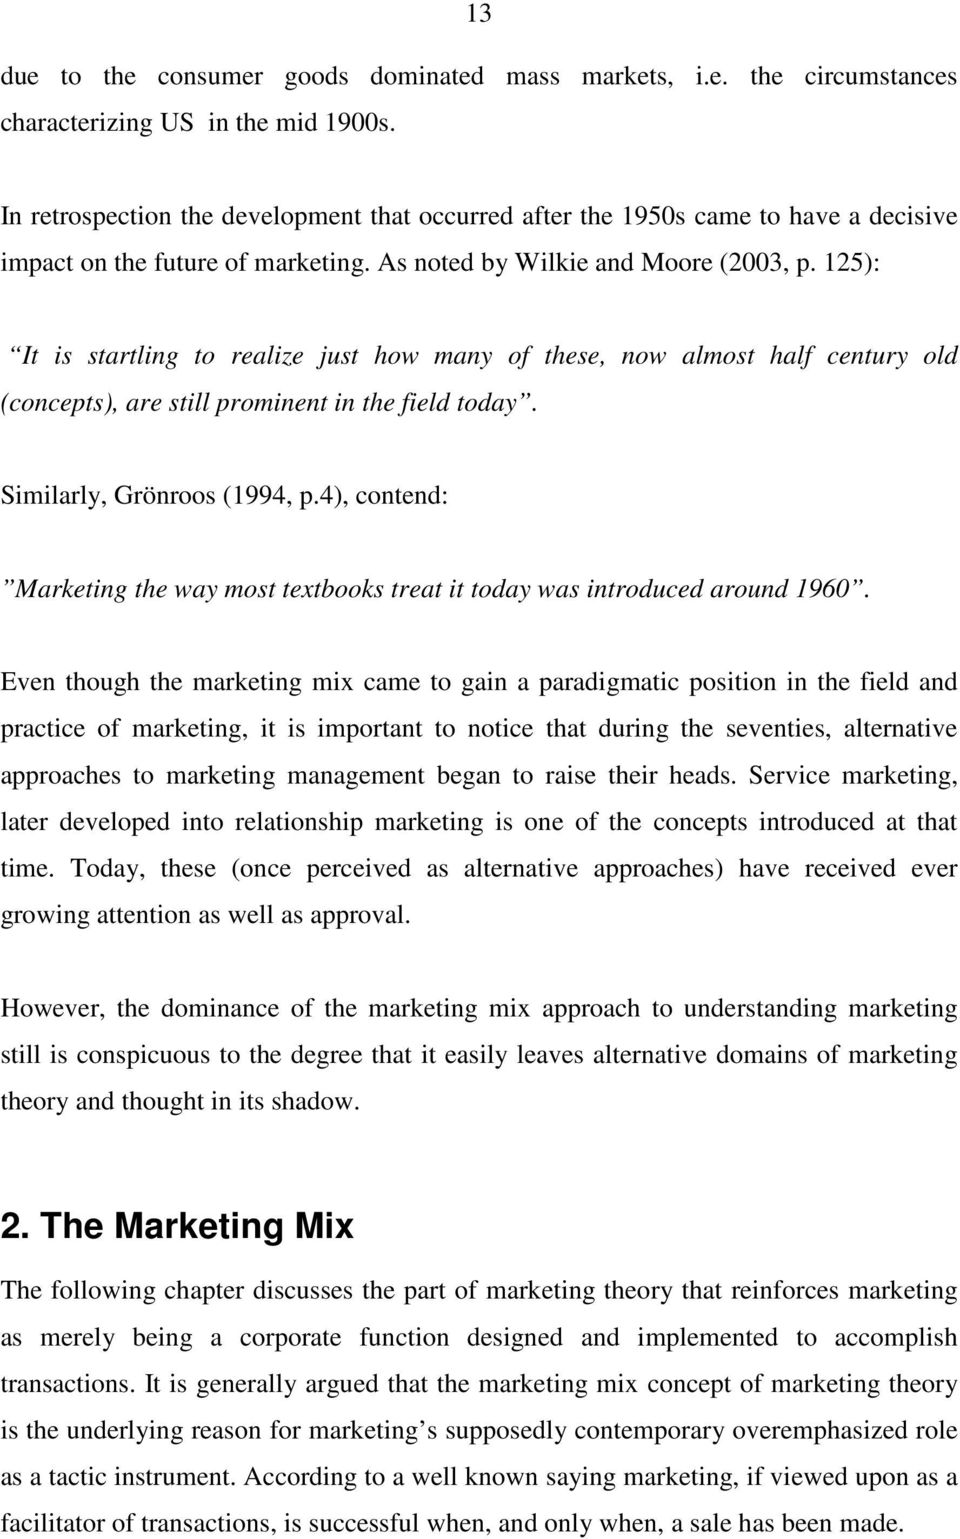 According to the argument, the marketer mixes or blends the various means of competition in order to reach an optimized or rather a satisfied profit function.